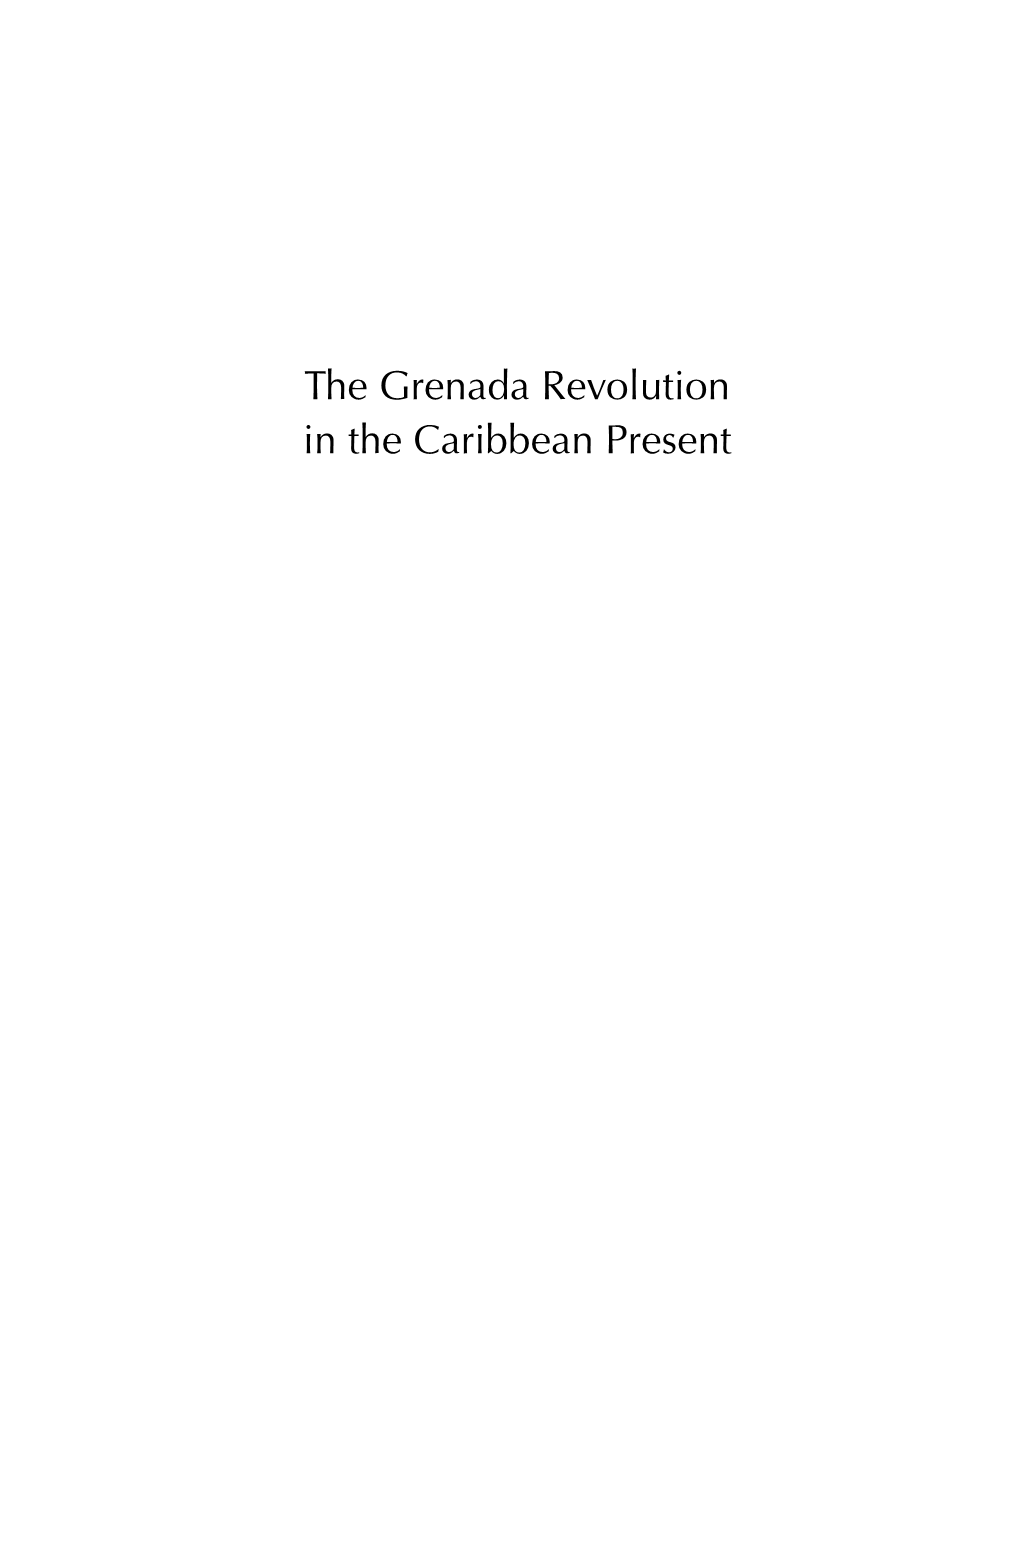 The Grenada Revolution in the Caribbean Present NEW CARIBBEAN STUDIES Edited by Koﬁ Campbell and Shalini Puri